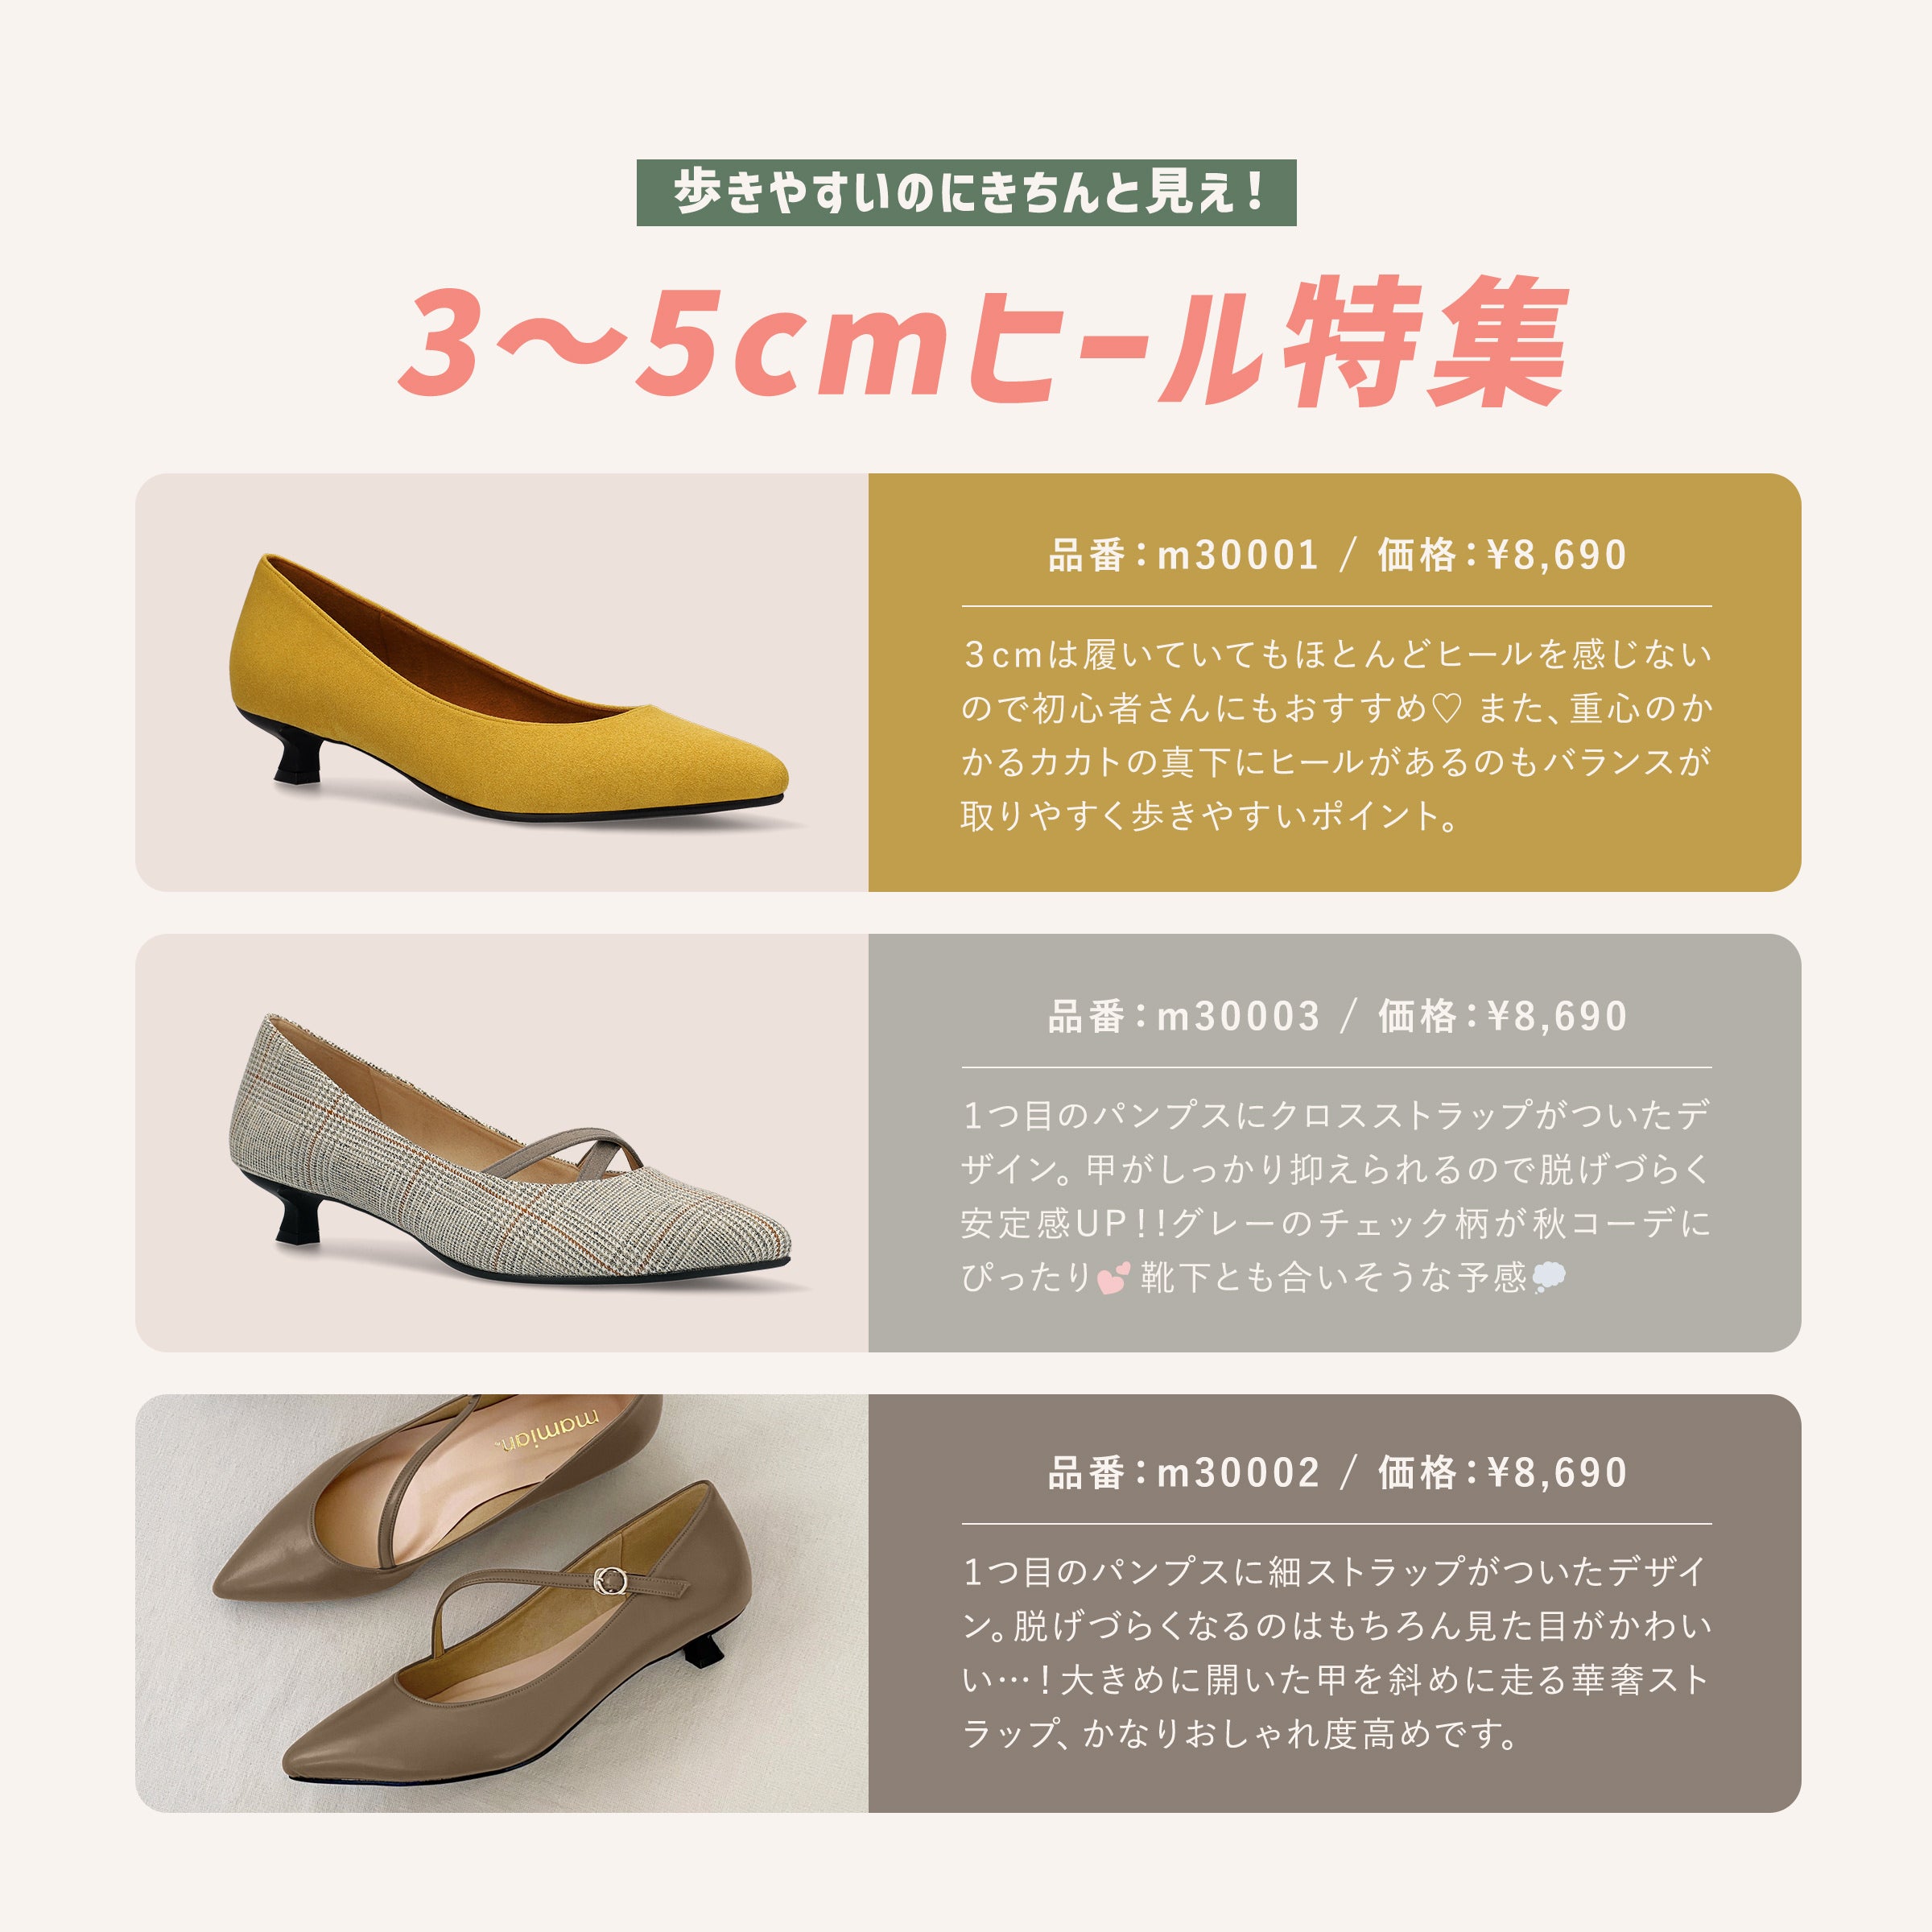 It is easy to walk and looks neat! Low heel feature